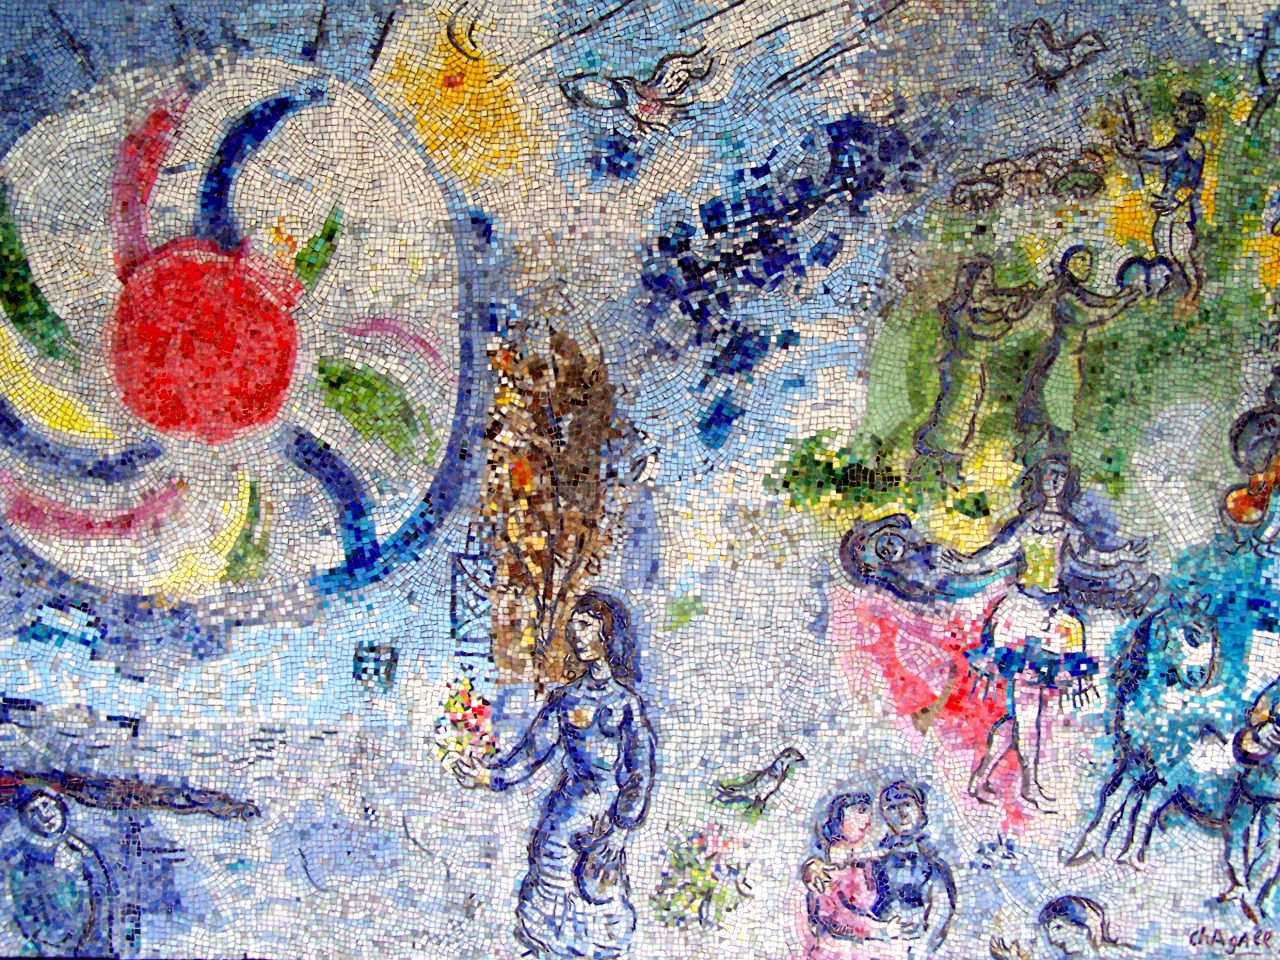 Chicago's Chagall Mosaic "The Four Seasons"